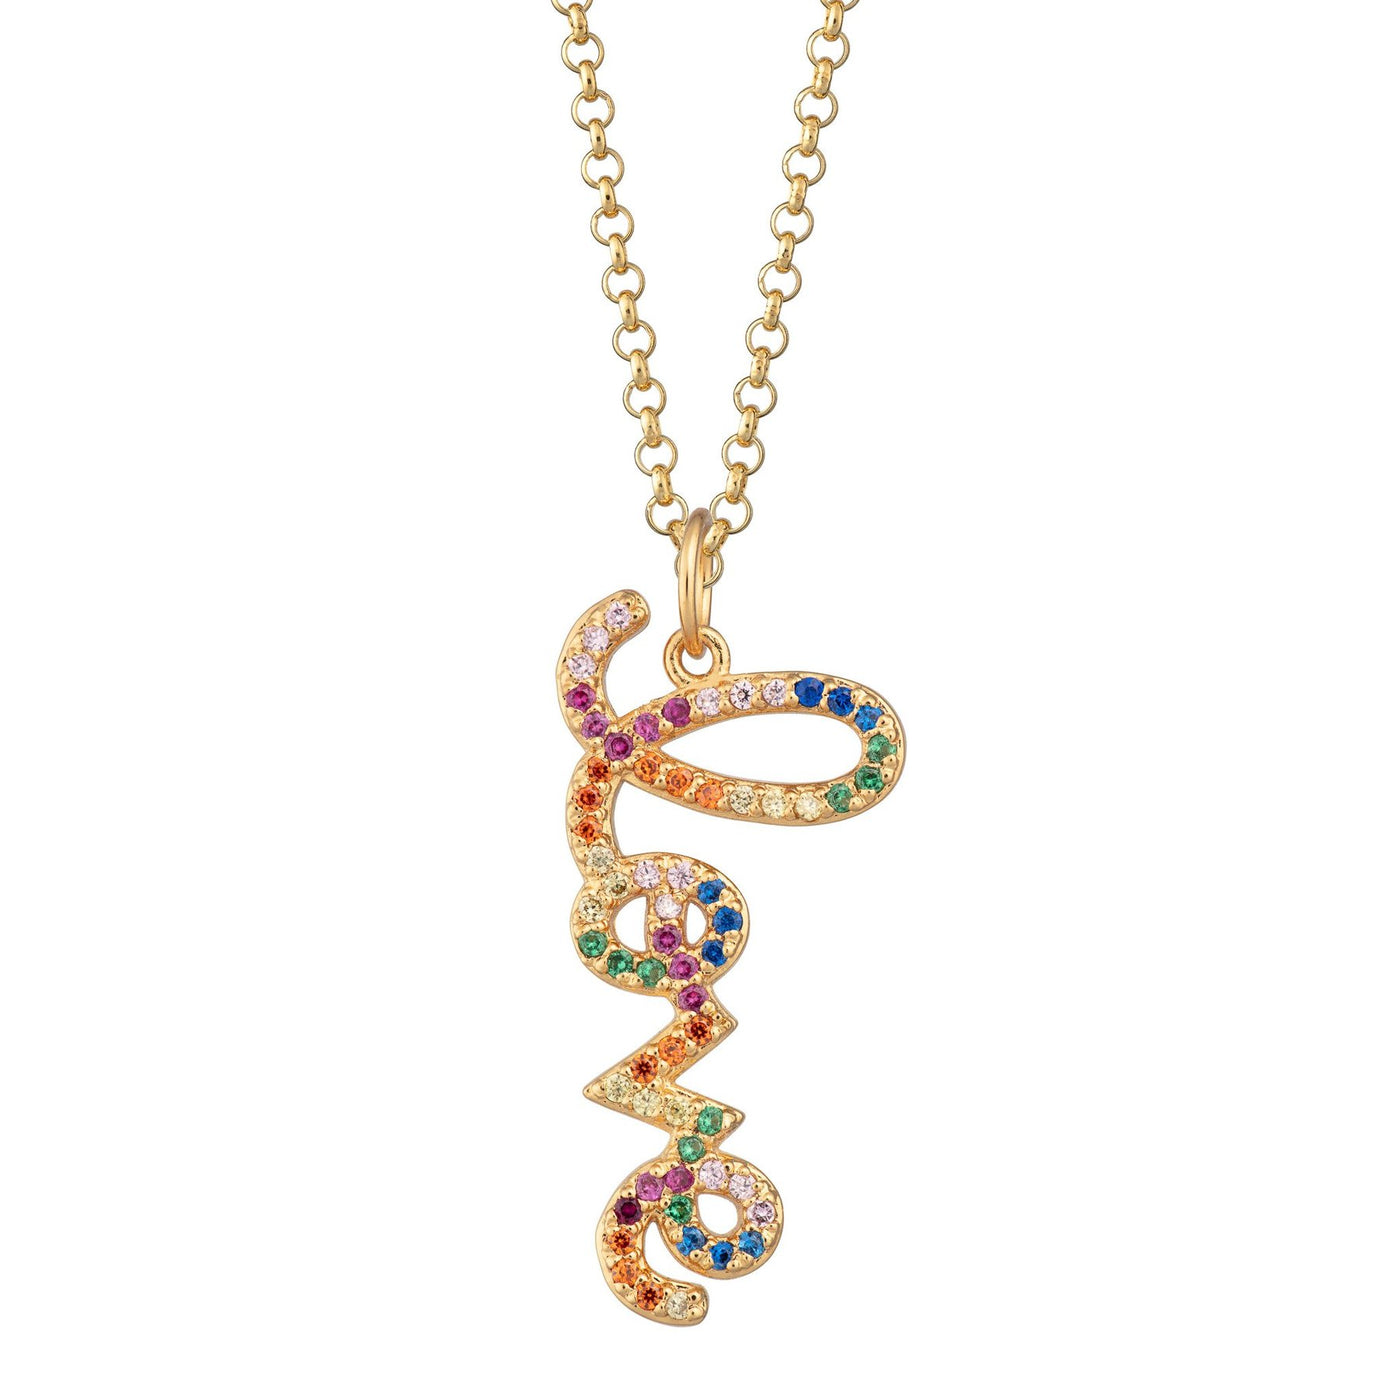 Rainbow Love Necklace in Gold Tones with Slider Clasp